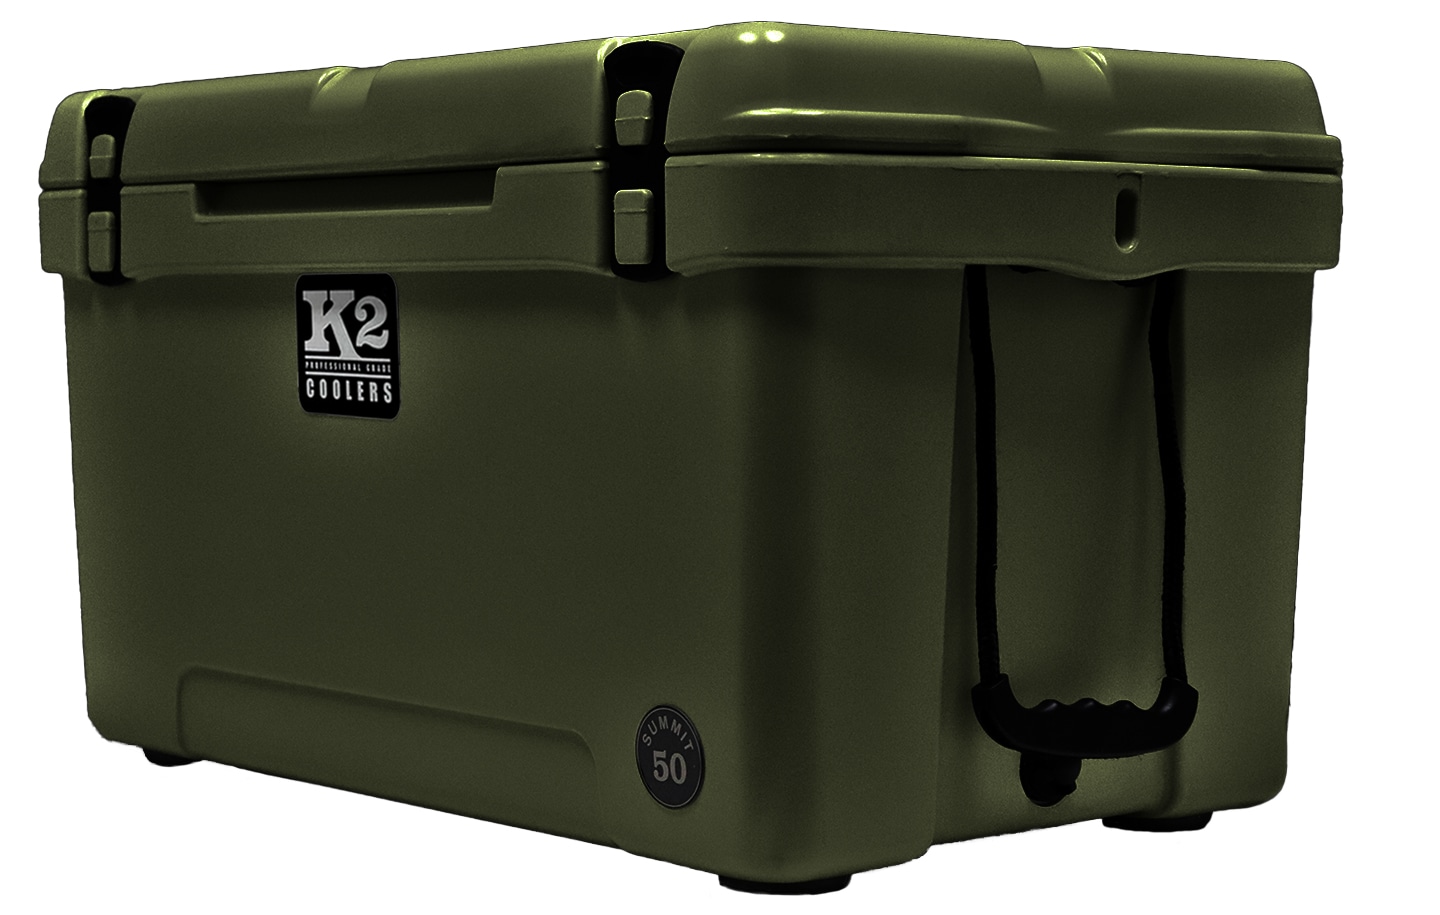 K2 Coolers Shallow Tray for The Summit 70 Aluminum